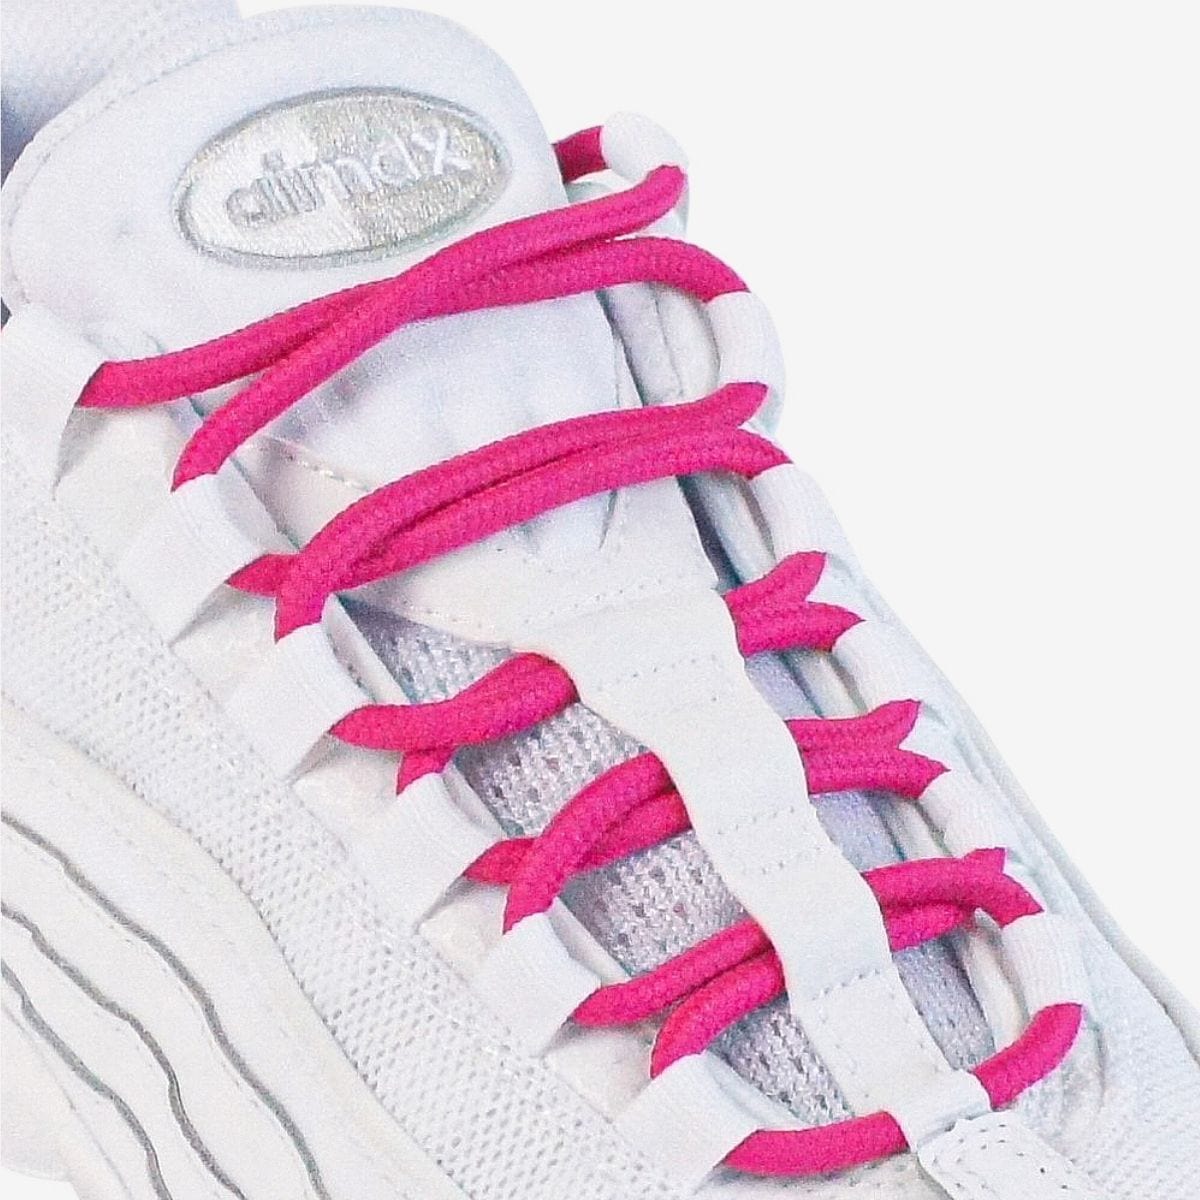 rose-pink-round-rope-shoelaces-for-sneakers-and-running-shoes